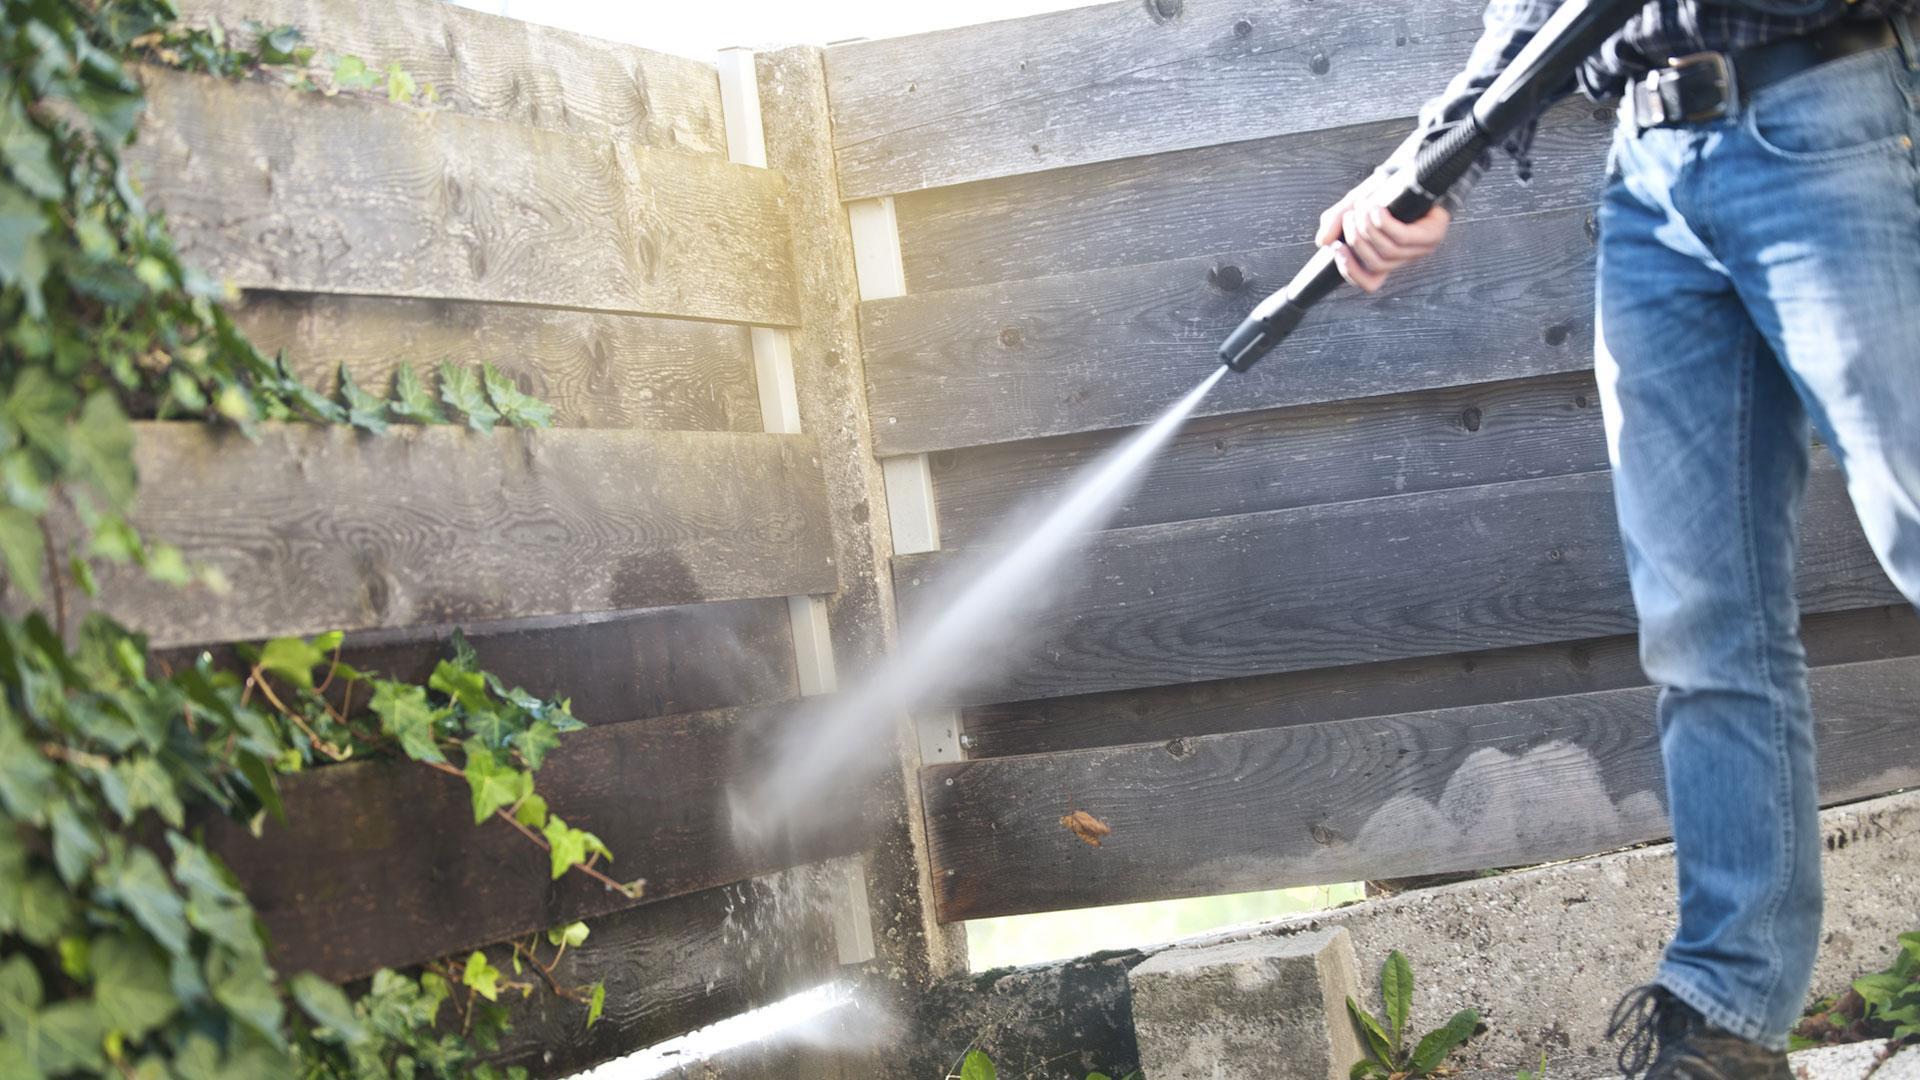 Black+Decker BEPW1850 Pressure Washer Review - Consumer Reports